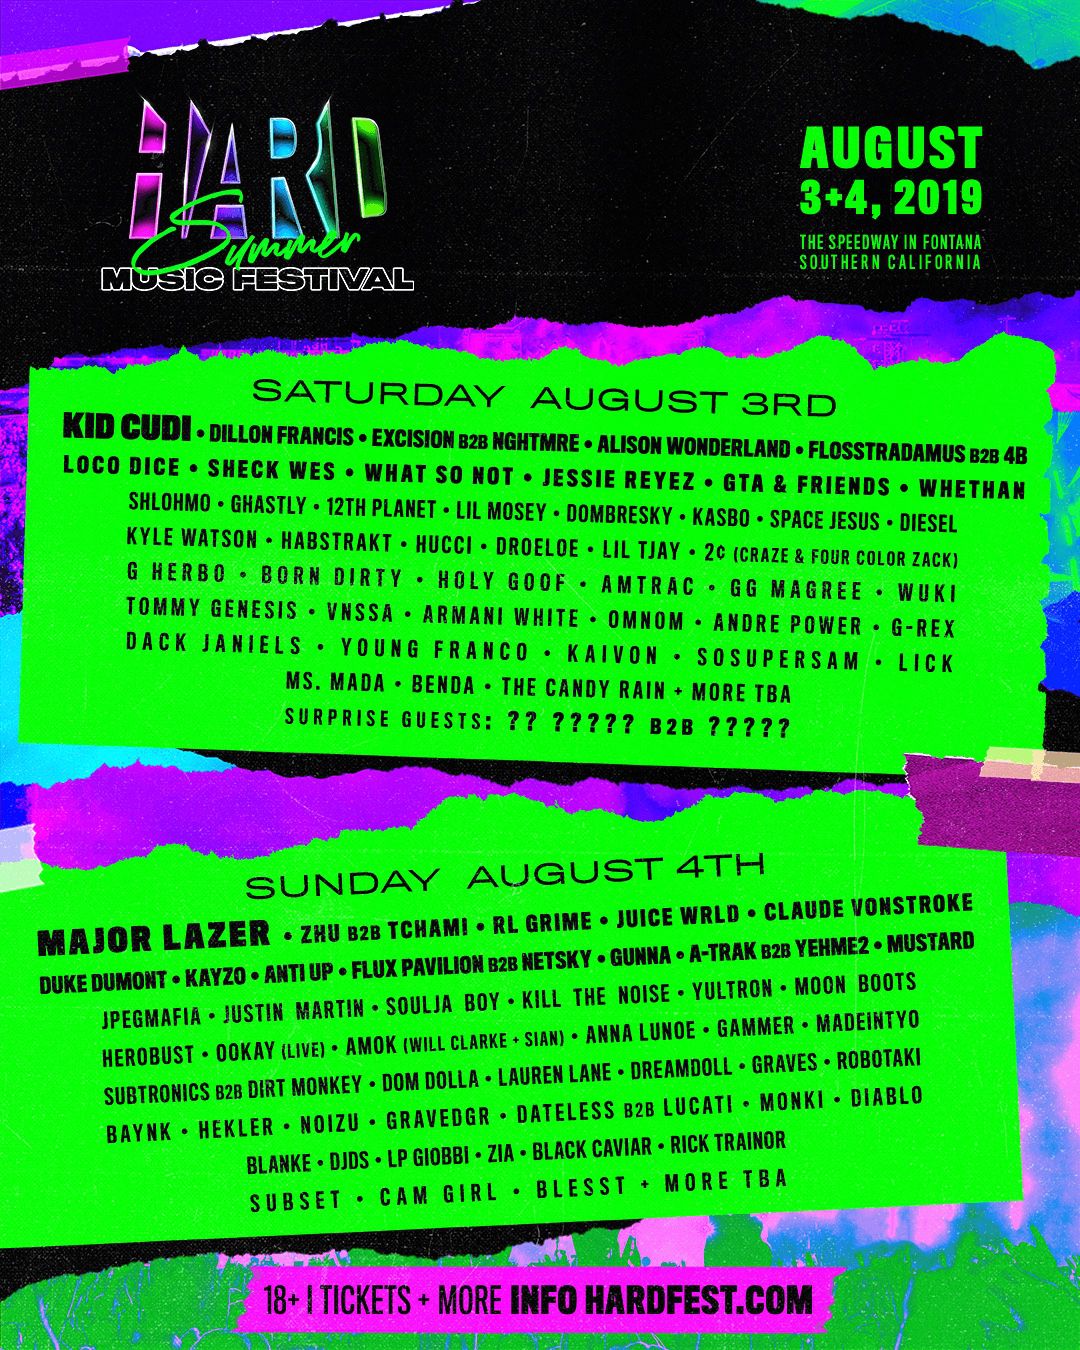 2 day wristbands for HARD SUMMER